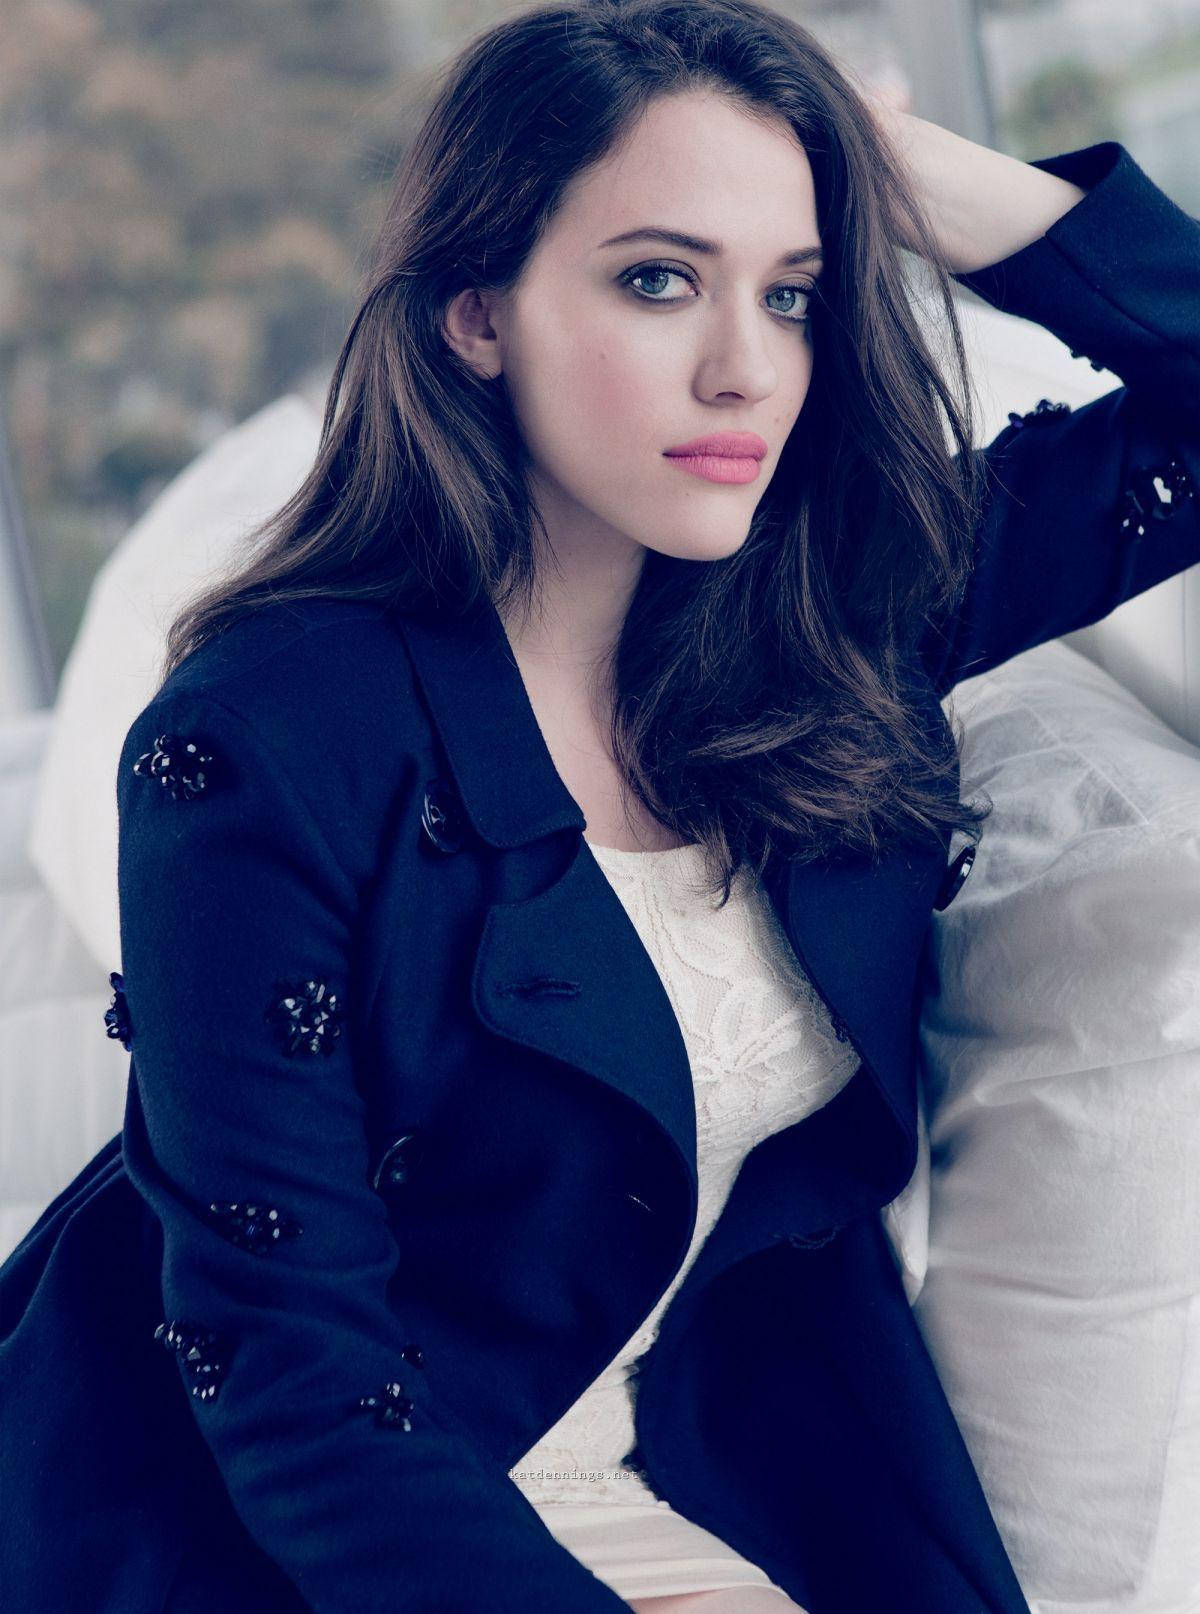 Kat Dennings Leaning On Couch 2014 Photoshoot